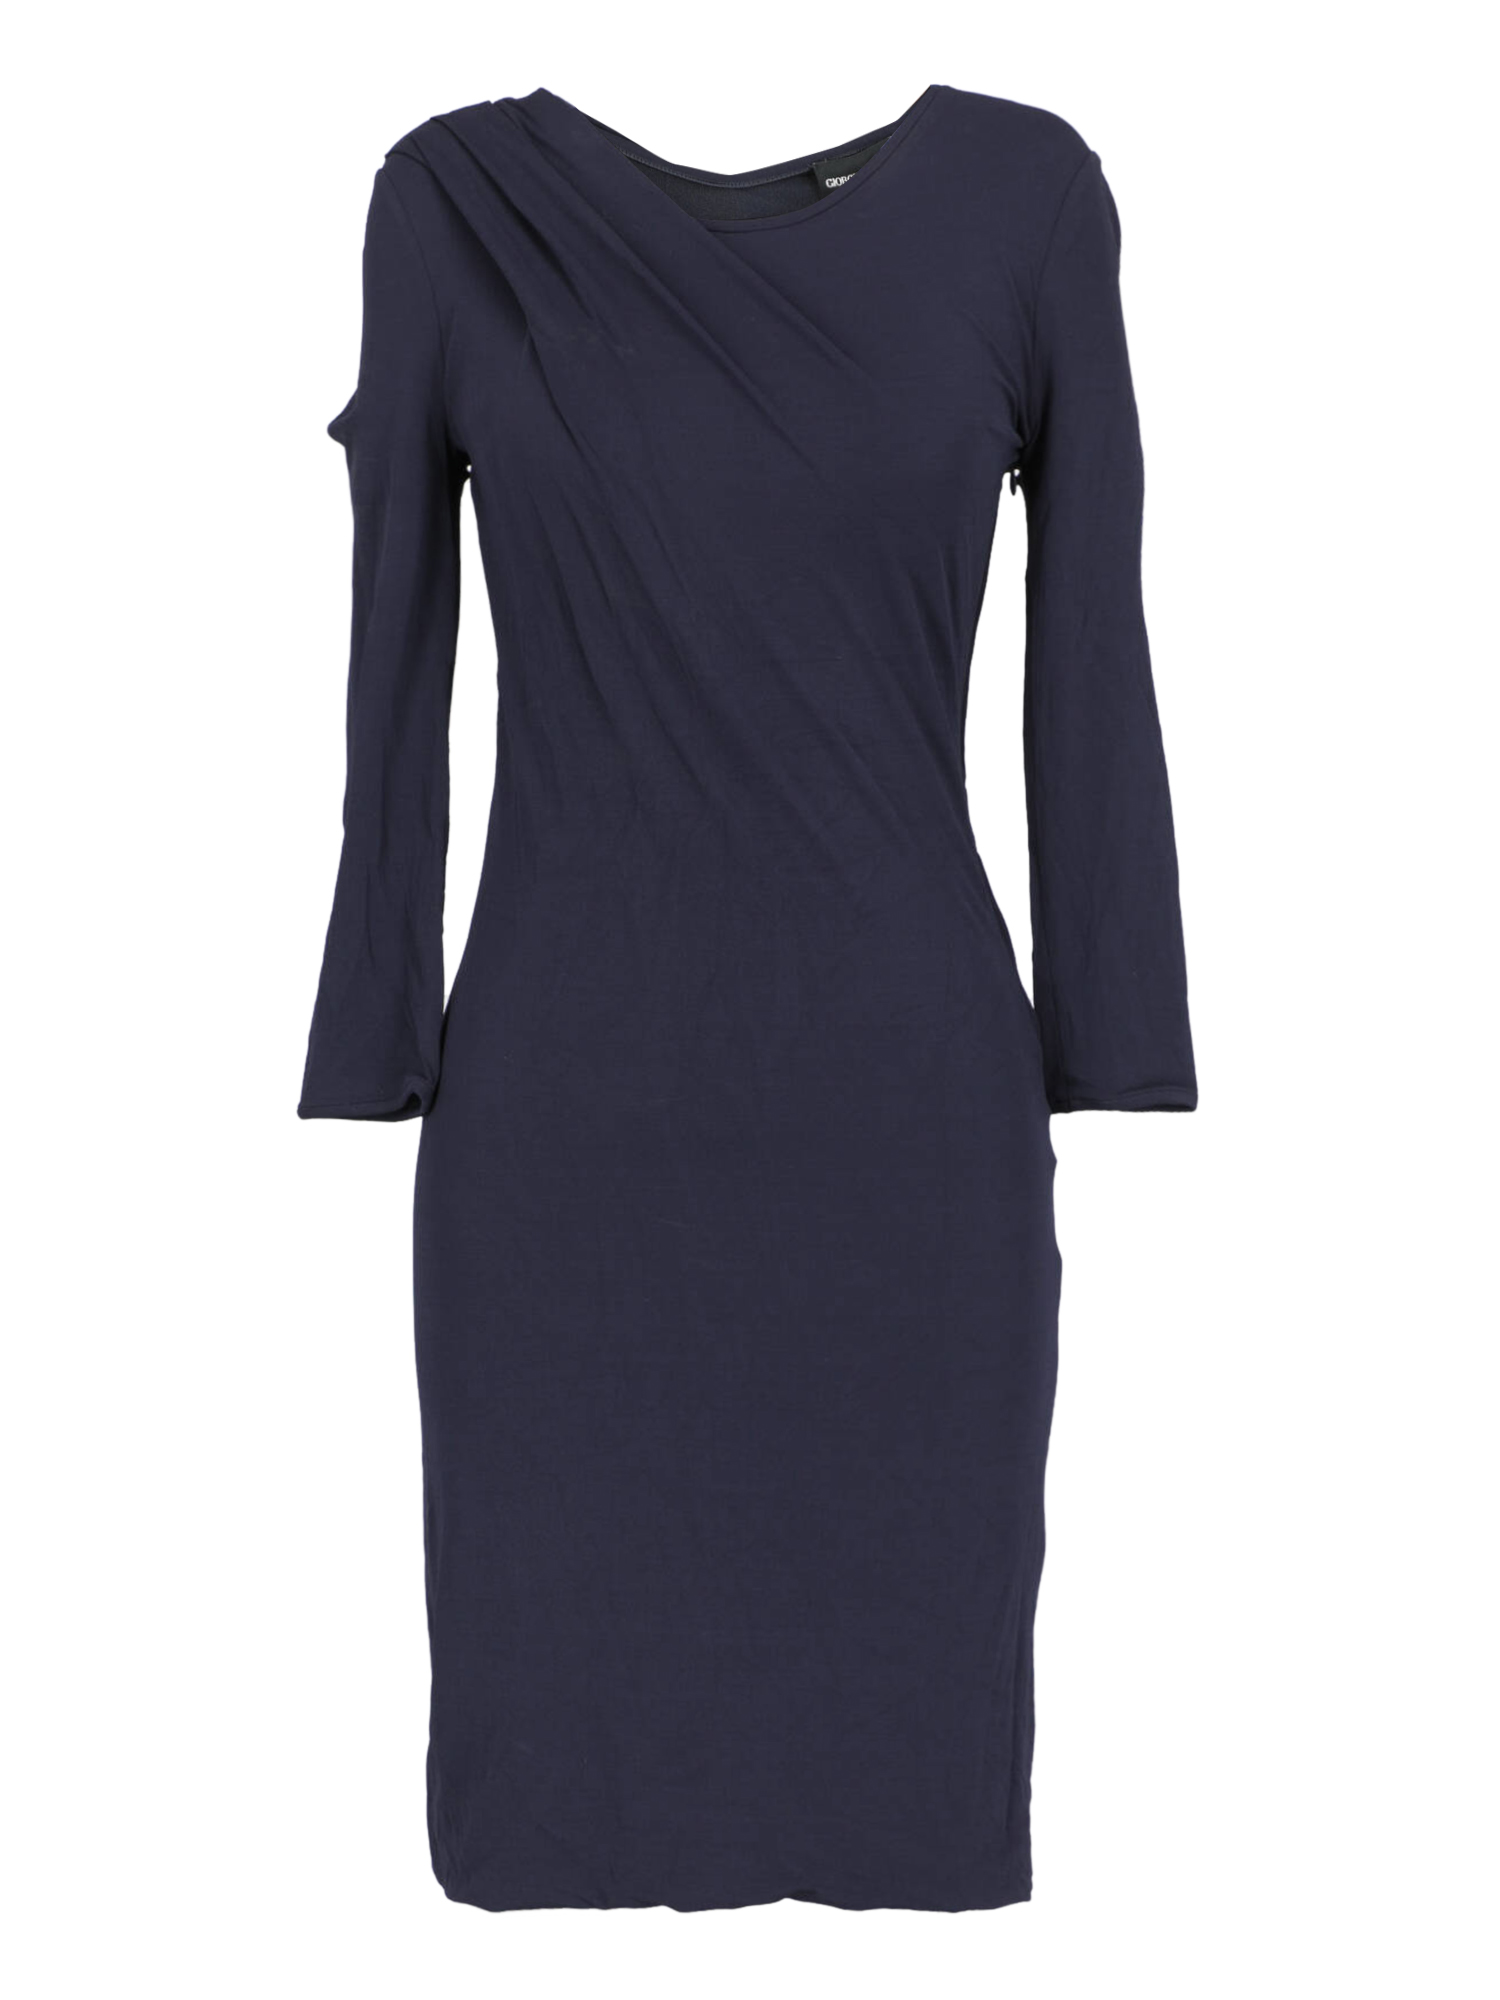 Condition: New With Tag, Solid Color Synthetic Fibers, Color: Navy - XS - IT 38 -